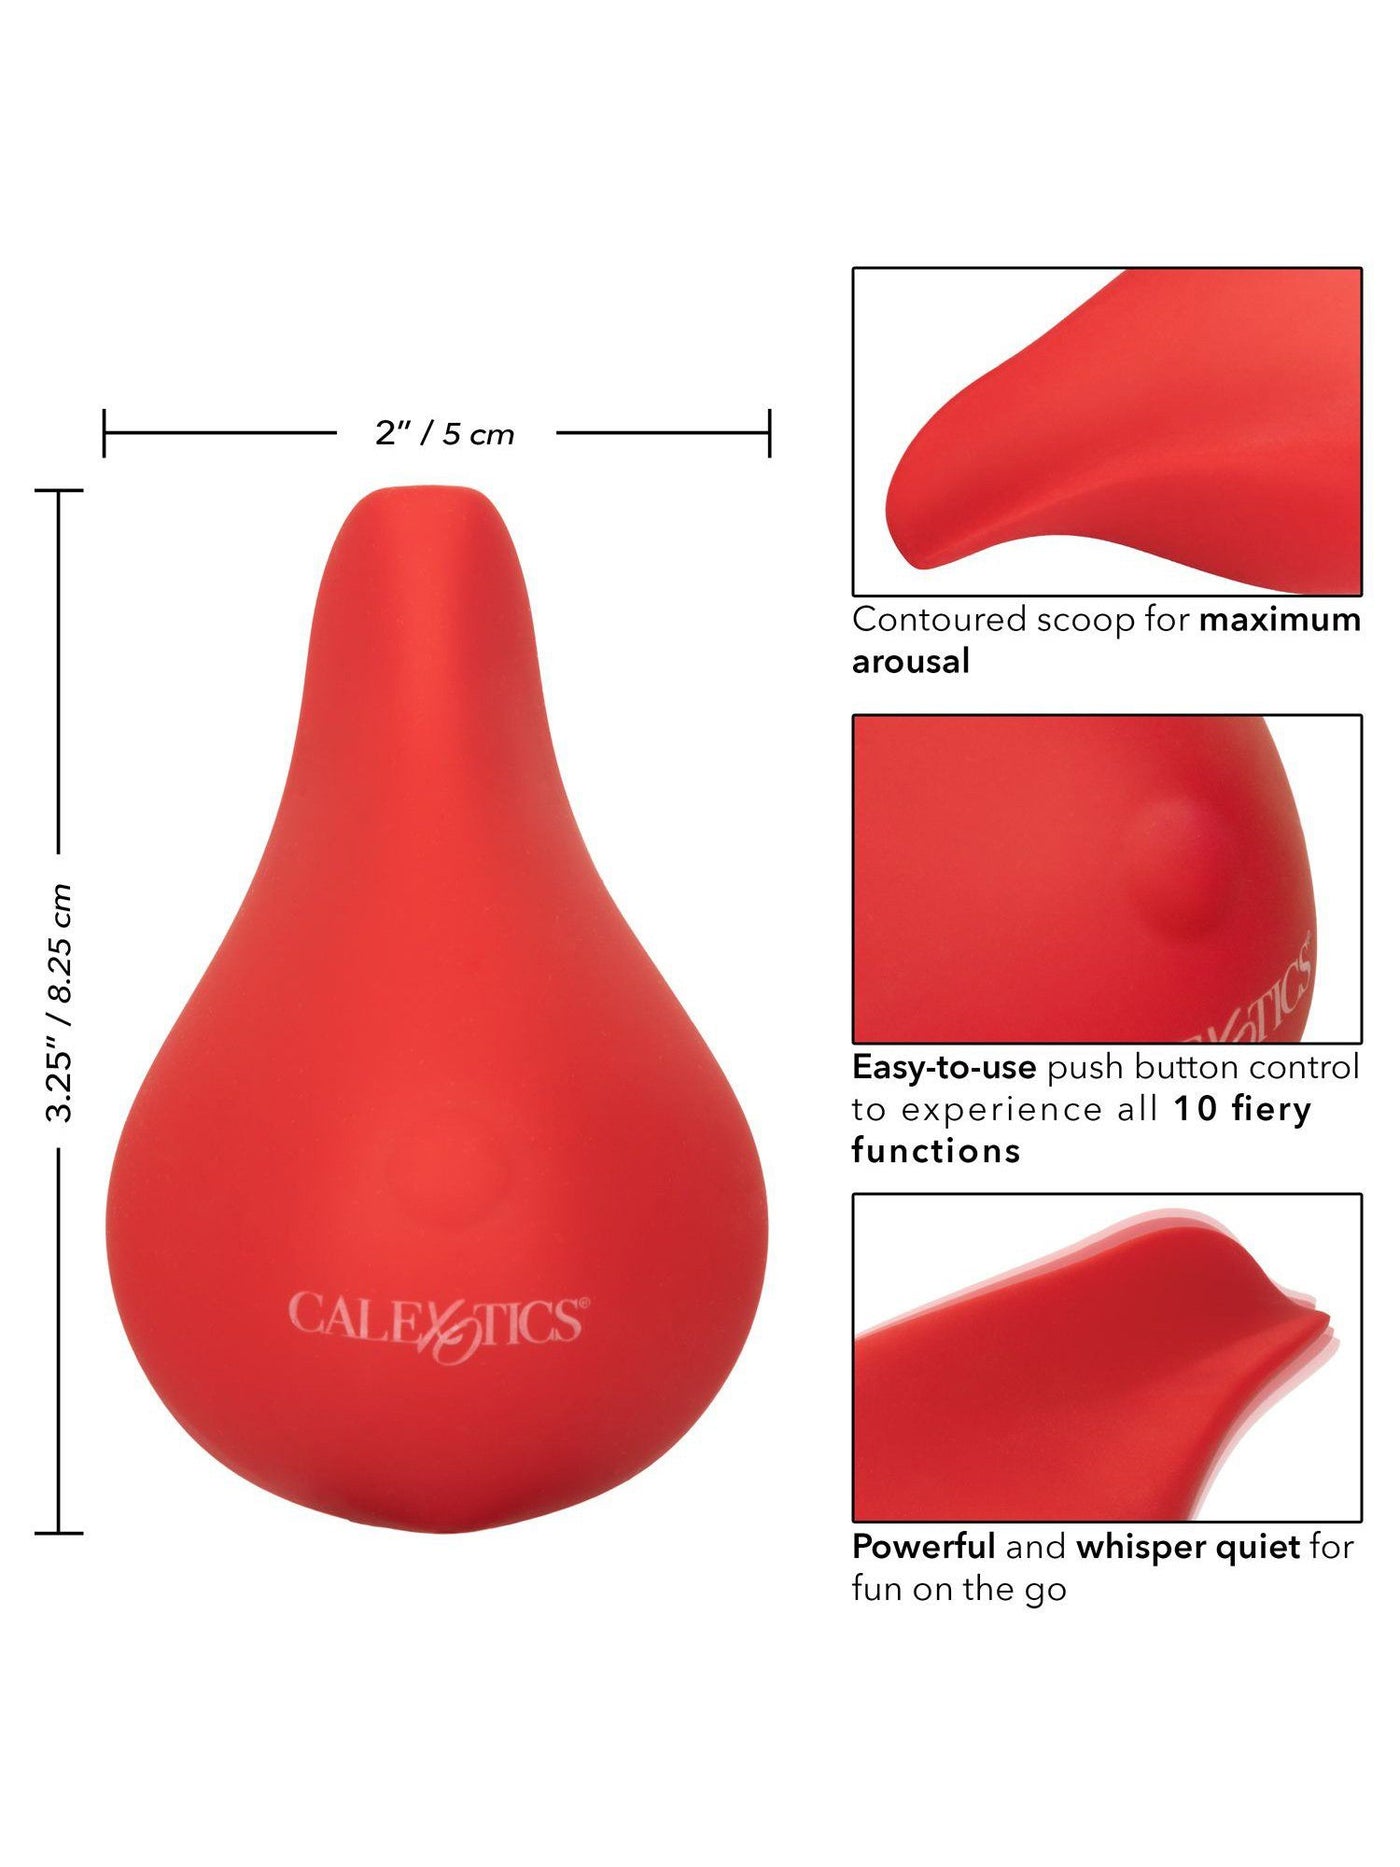 Red Hot Glow Rechargeable Massager Vibrators CalExotics Red